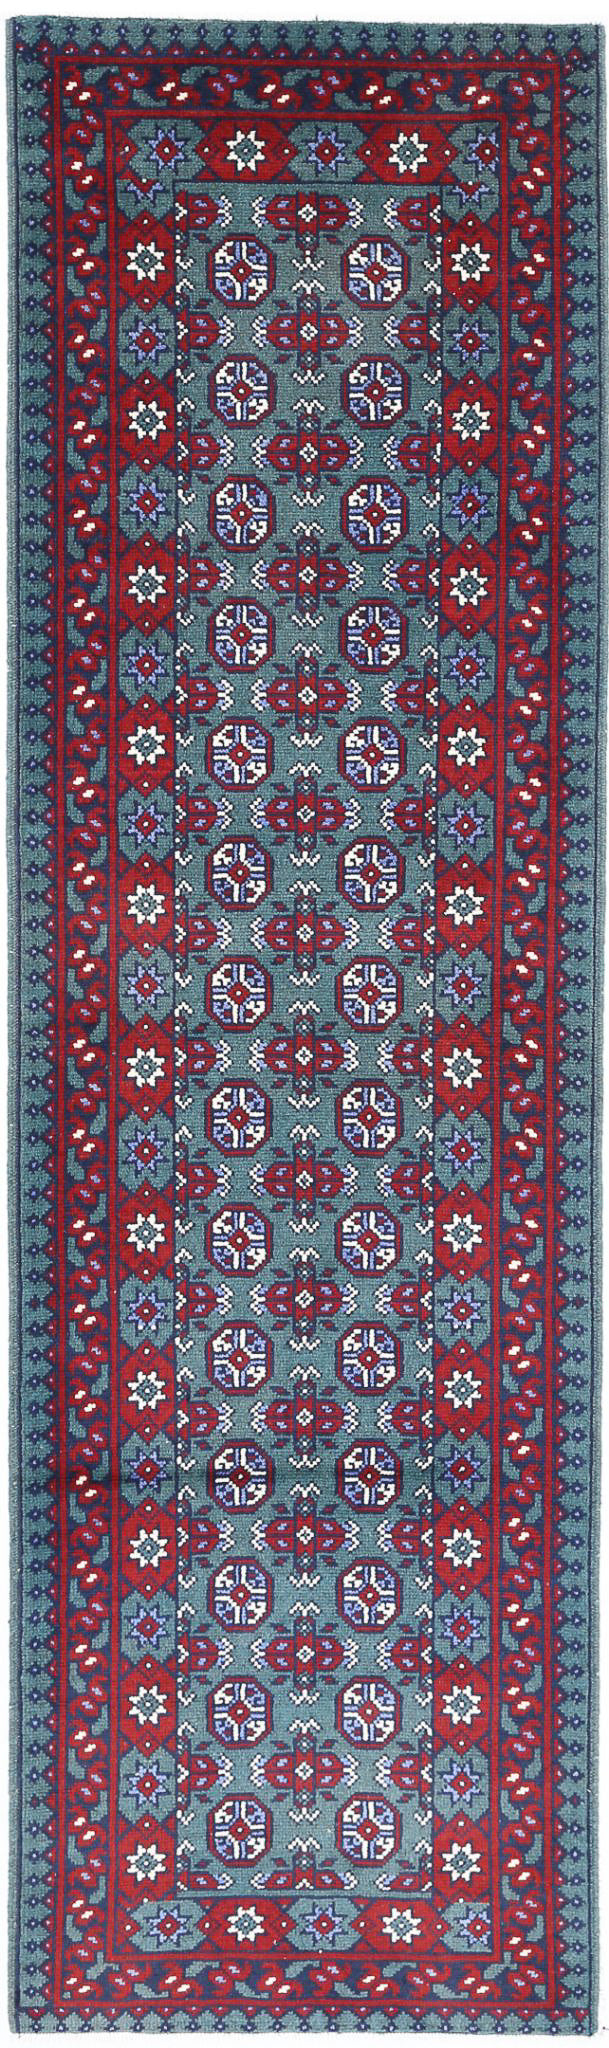 Revival-hand-knotted-gul-collection-wool-rug-5013992.jpg